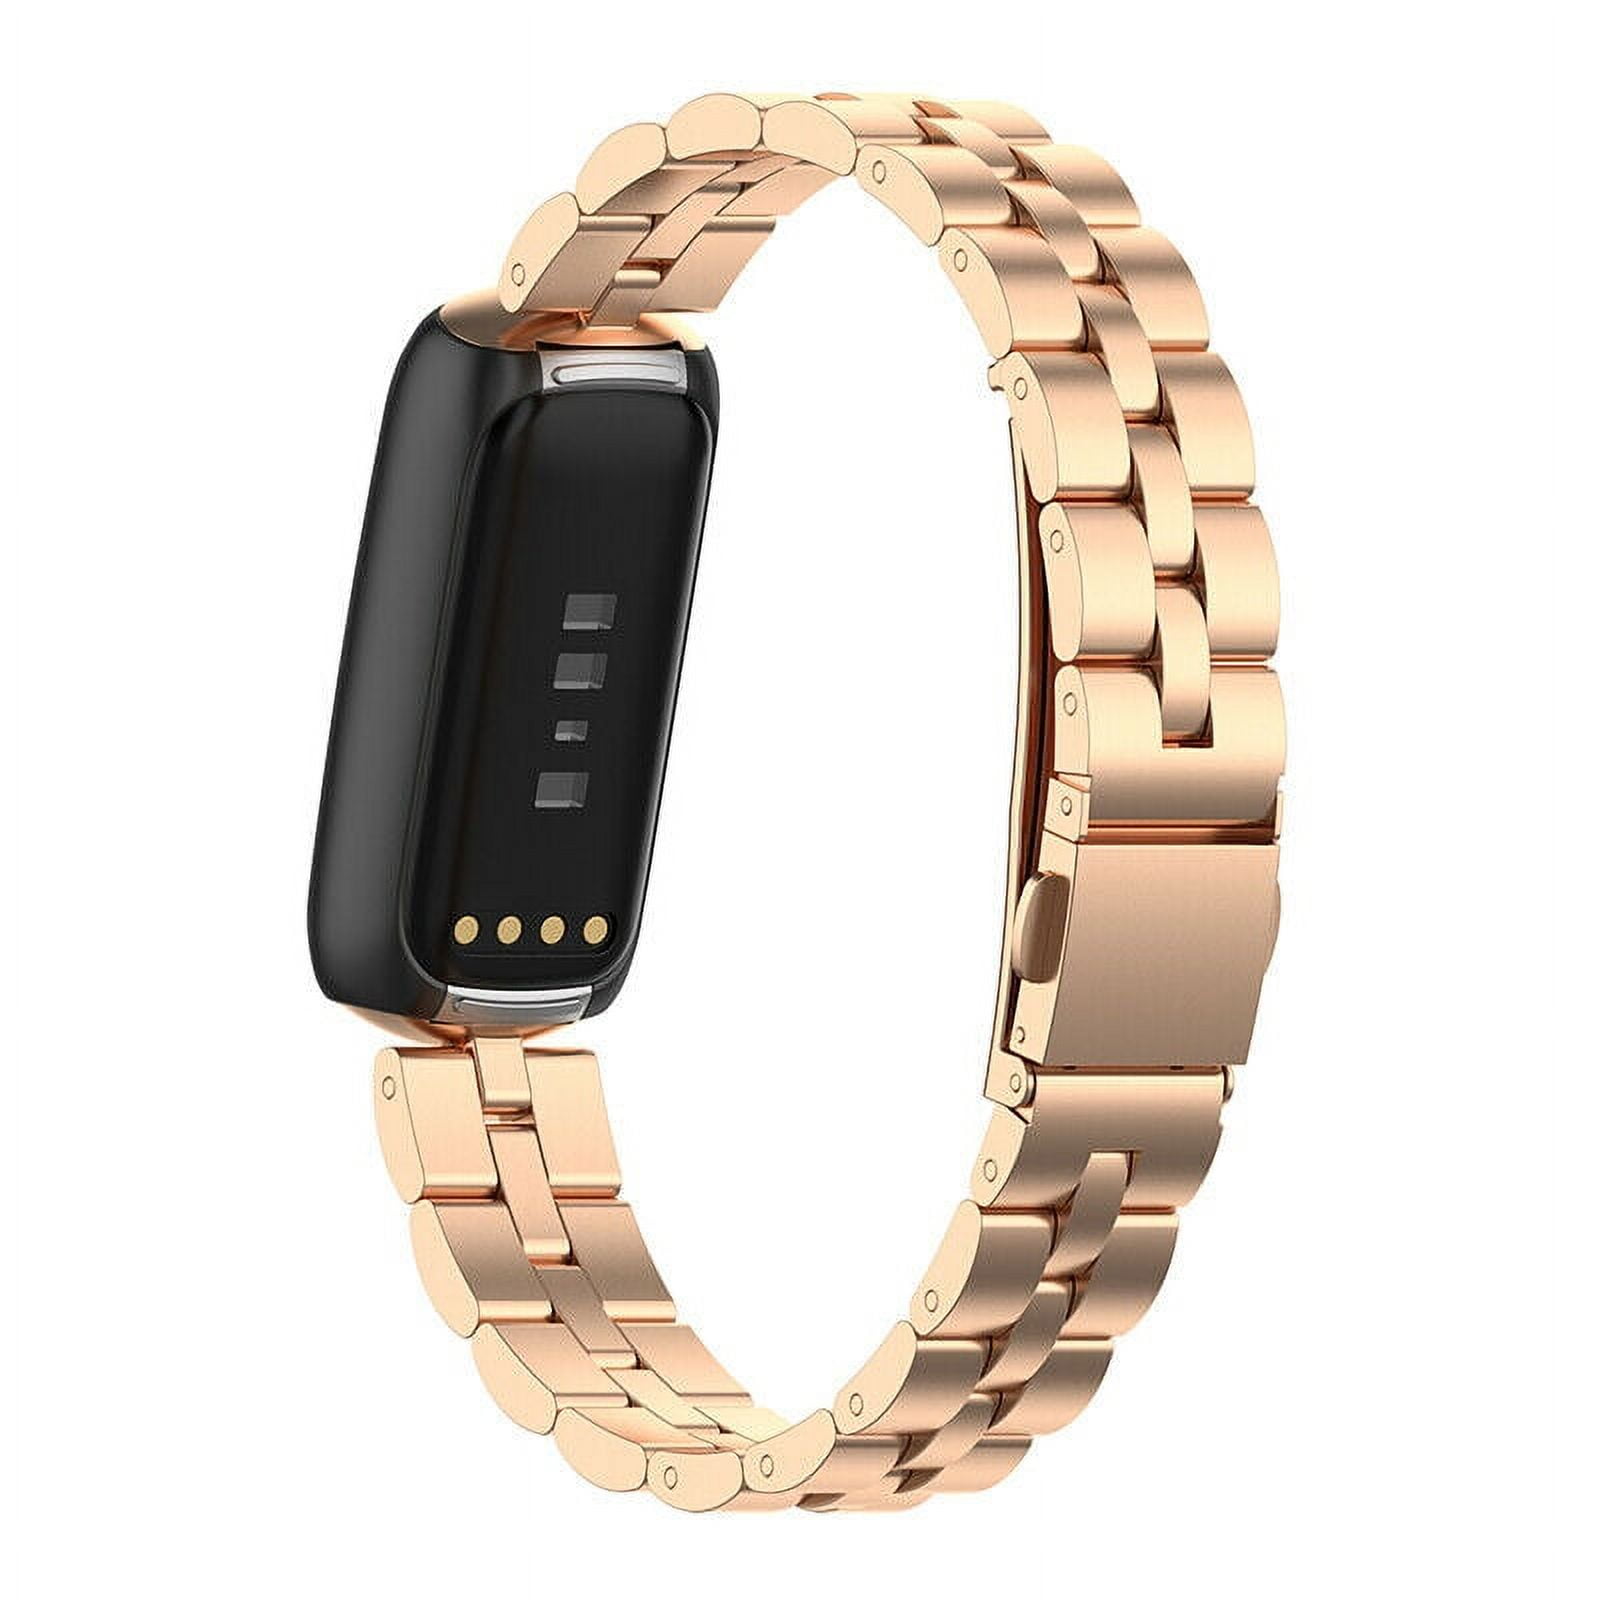 Slim Black Leather Fitbit Luxe Band Gold Fitbit Luxe Bracelet Adjustable  Fitbit Luxe Wristband Women Fitbit Luxe Jewelry